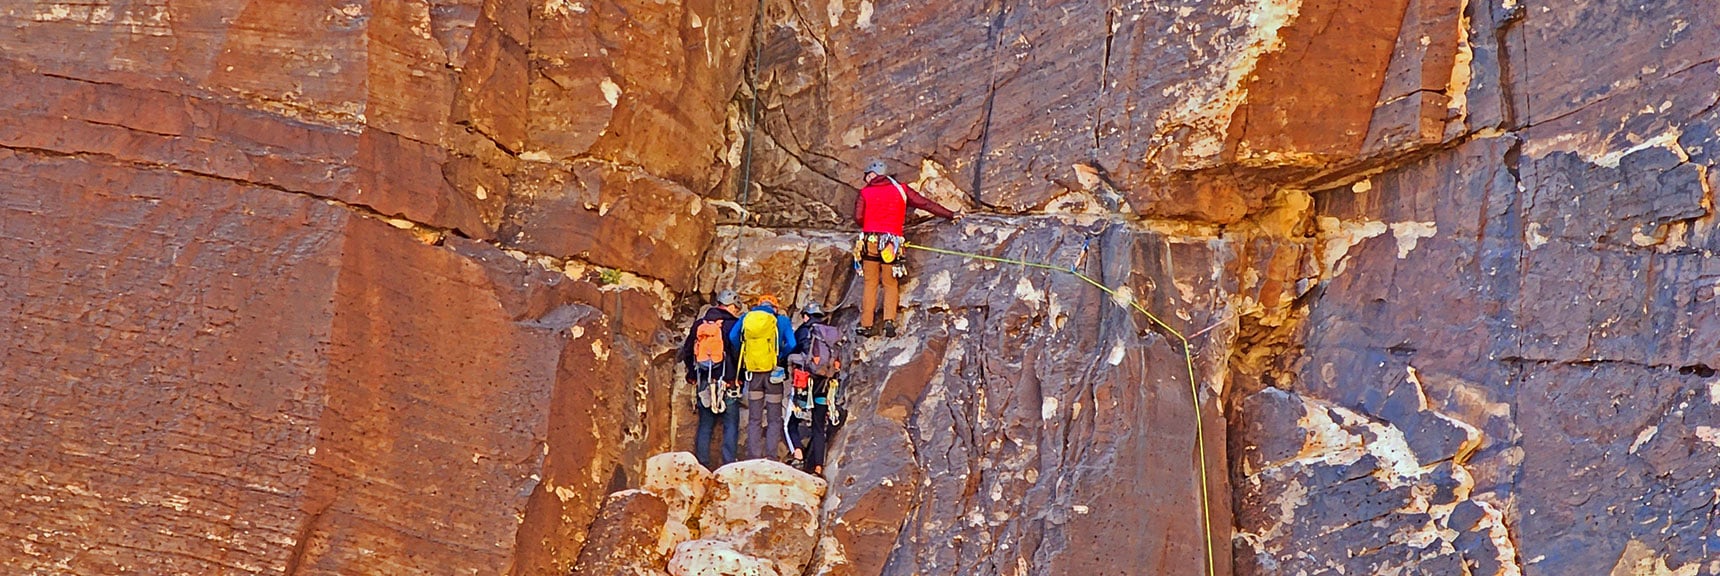 Rope and Anchor Strategy is Very Technical and Crucial to Success. | Rock Climber Observations | Pine Creek Canyon | Rainbow Mountain Wilderness, Nevada